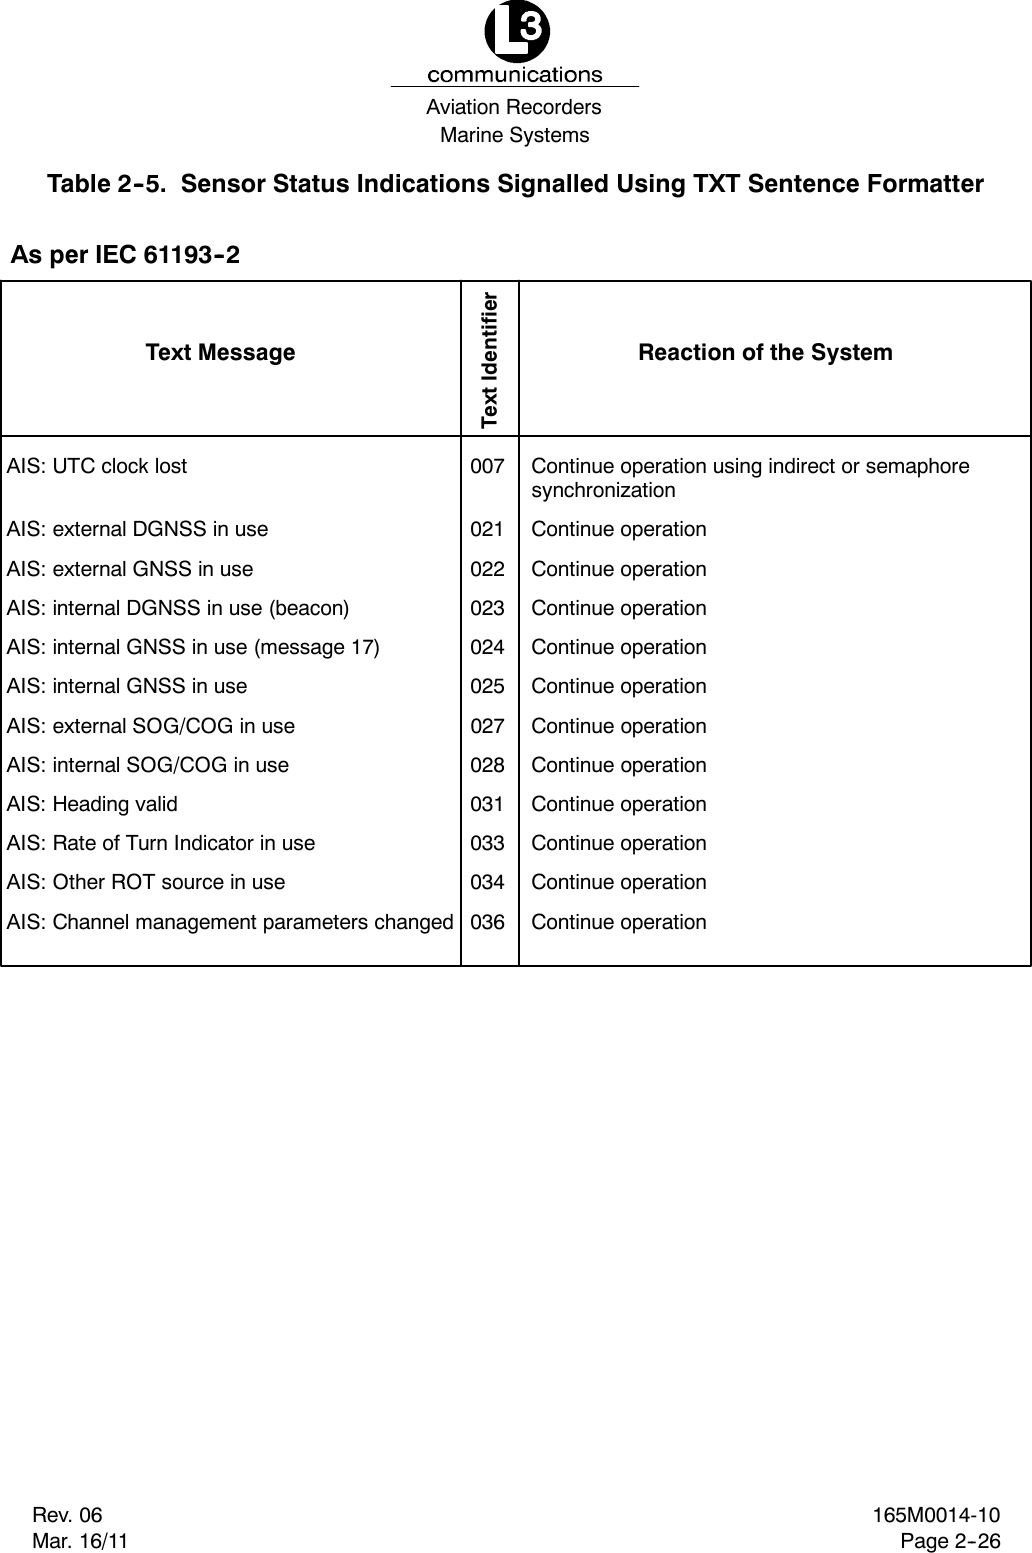 Marine SystemsAviation RecordersRev. 06Mar. 16/11165M0014-10Page 2--26Table 2--5. Sensor Status Indications Signalled Using TXT Sentence FormatterText MessageText IdentifierReaction of the SystemAIS: UTC clock lost 007 Continue operation using indirect or semaphoresynchronizationAIS: external DGNSS in use 021 Continue operationAIS: external GNSS in use 022 Continue operationAIS: internal DGNSS in use (beacon) 023 Continue operationAIS: internal GNSS in use (message 17) 024 Continue operationAIS: internal GNSS in use 025 Continue operationAIS: external SOG/COG in use 027 Continue operationAIS: internal SOG/COG in use 028 Continue operationAIS: Heading valid 031 Continue operationAIS: Rate of Turn Indicator in use 033 Continue operationAIS: Other ROT source in use 034 Continue operationAIS: Channel management parameters changed 036 Continue operationAs per IEC 61193--2